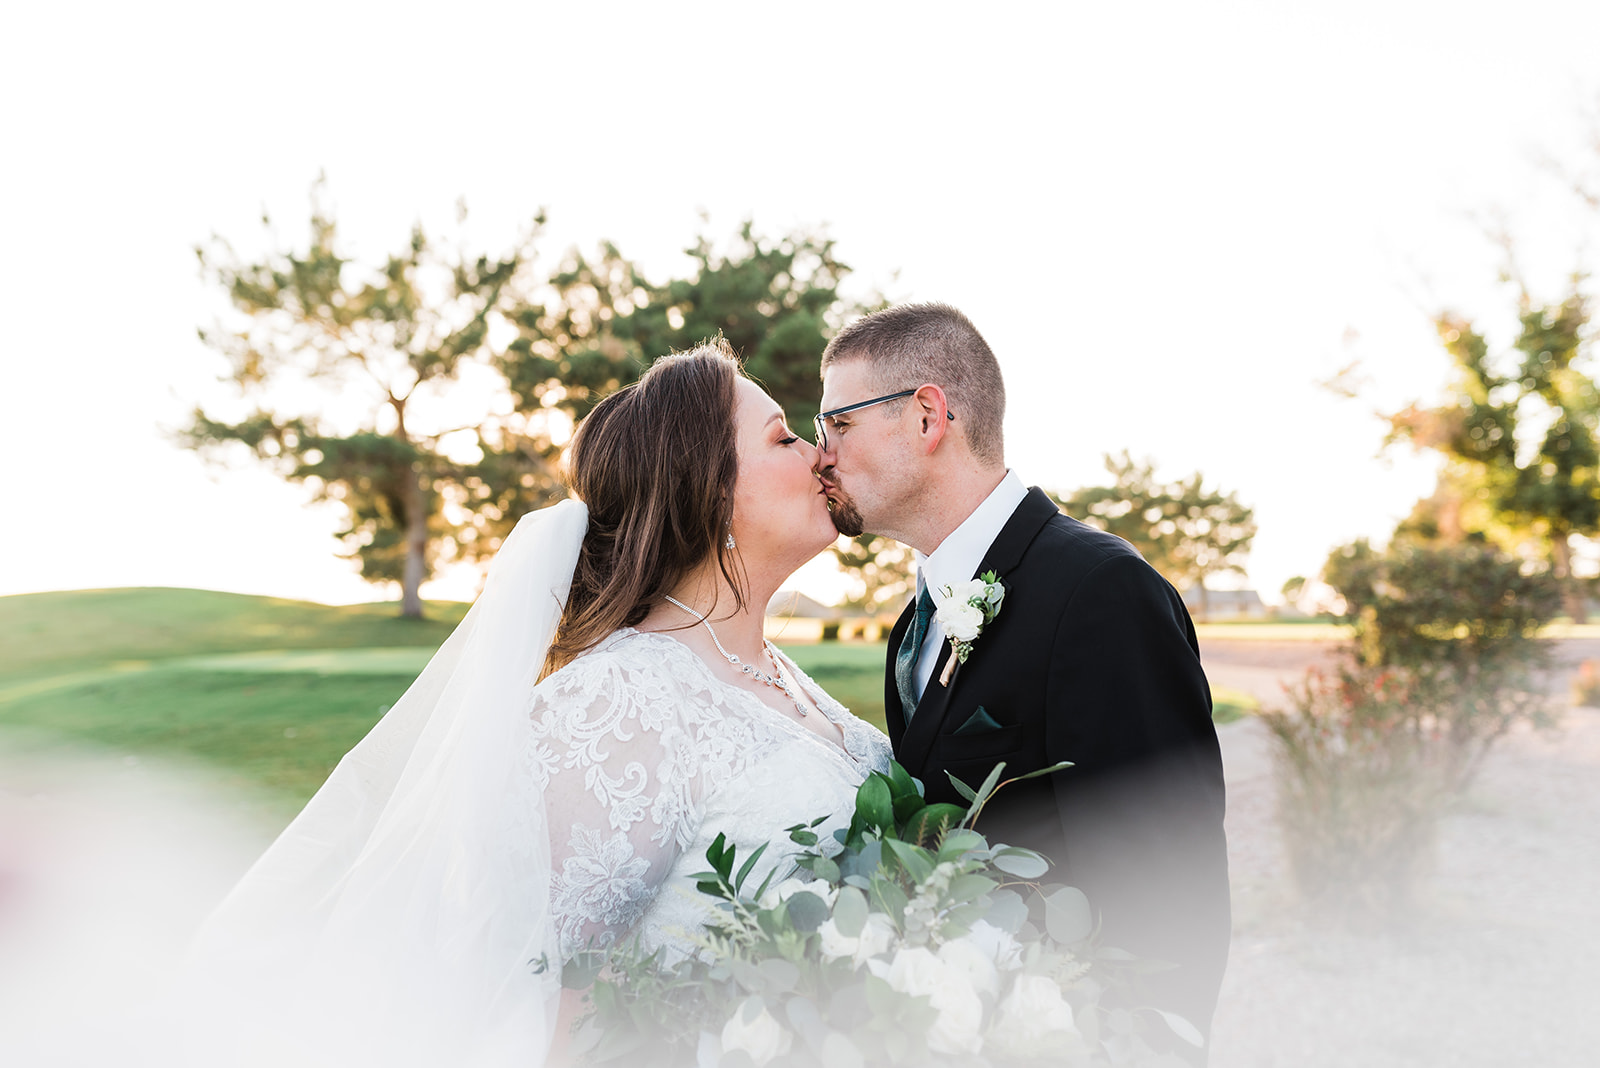 Newlyweds kiss in a garden at sunset while the veil flies around them at a Lindsay Grove Wedding